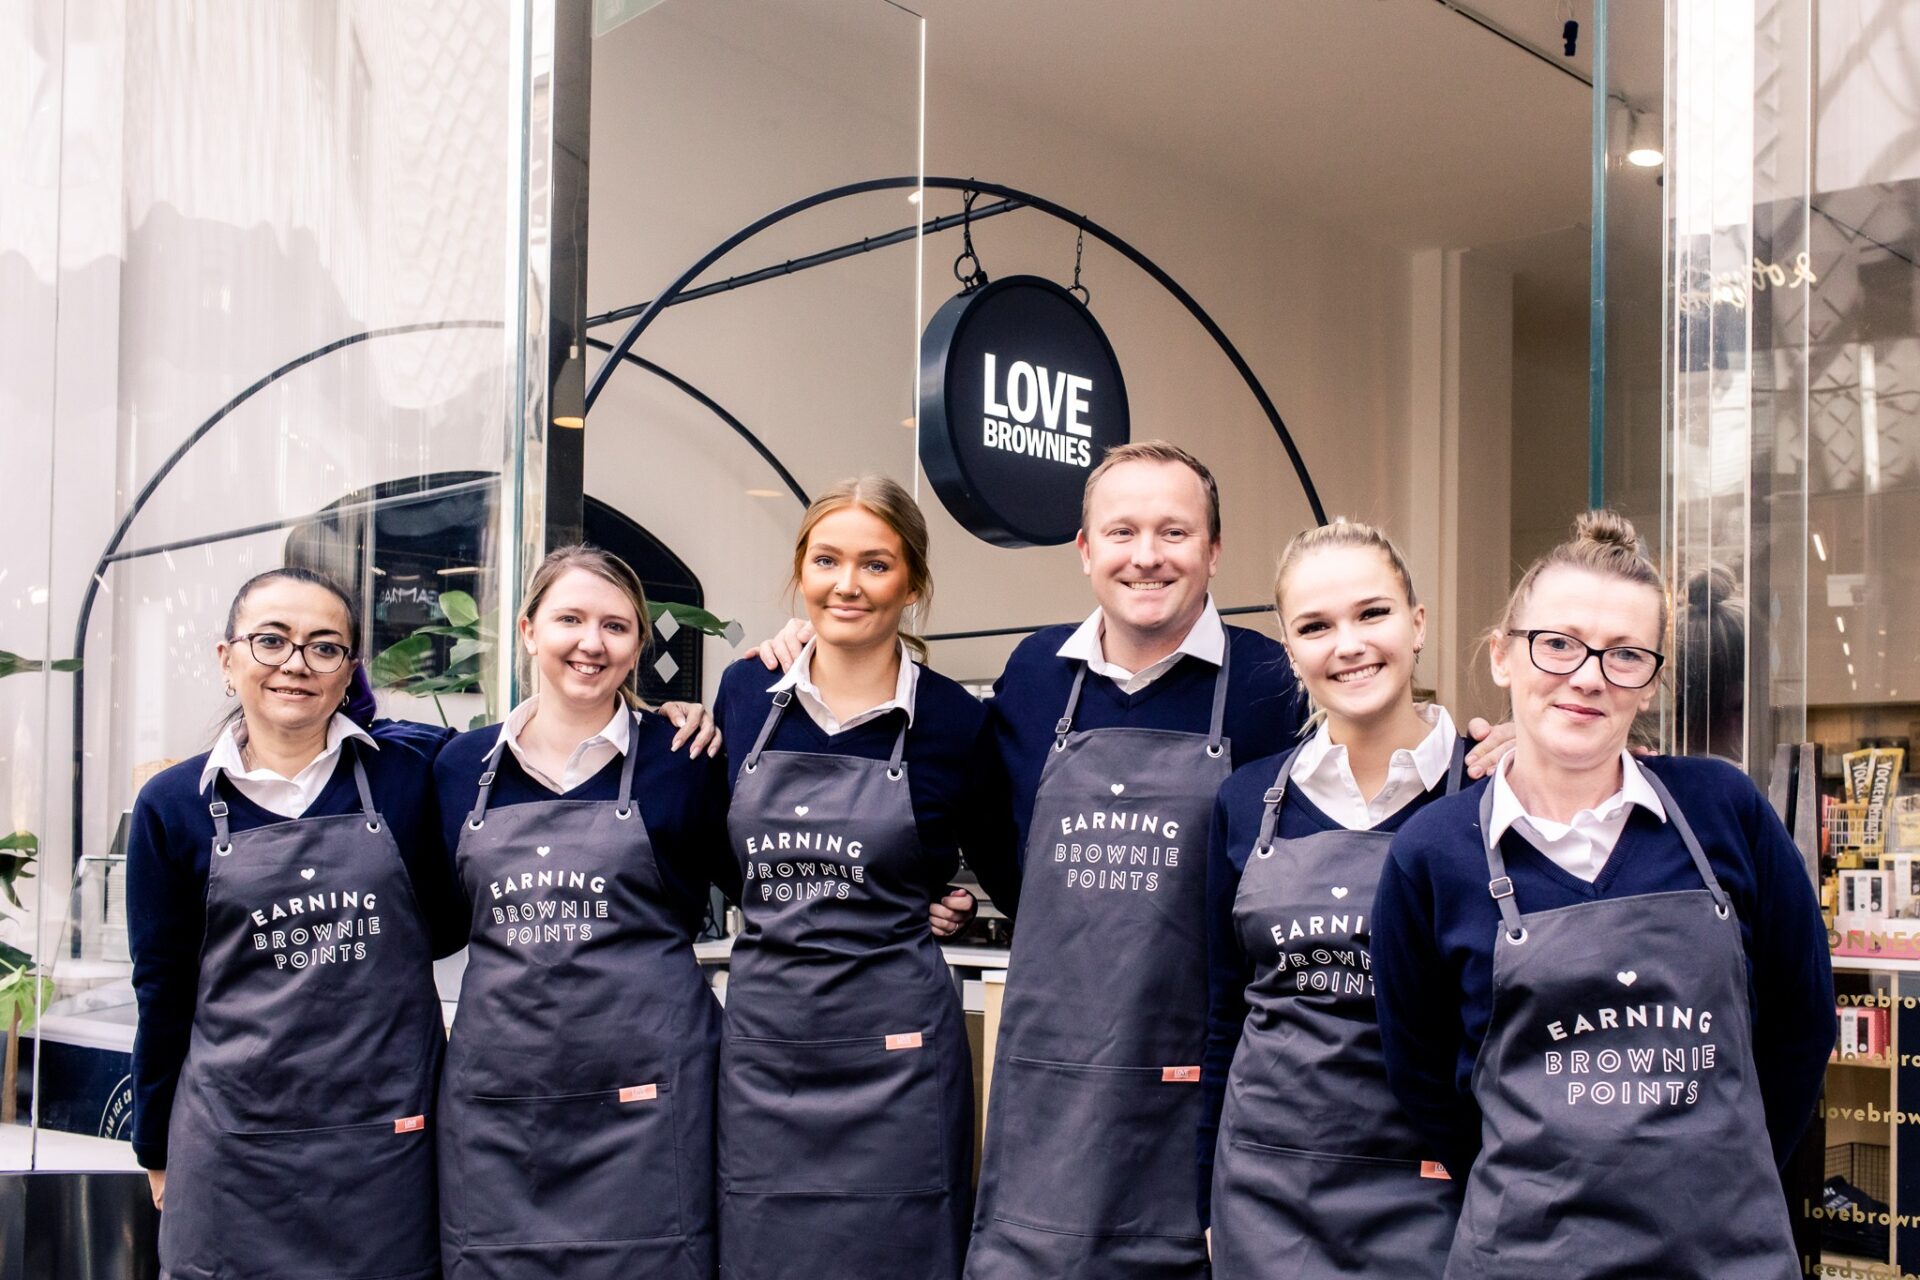 Love Brownies enjoys successful Franchise Show